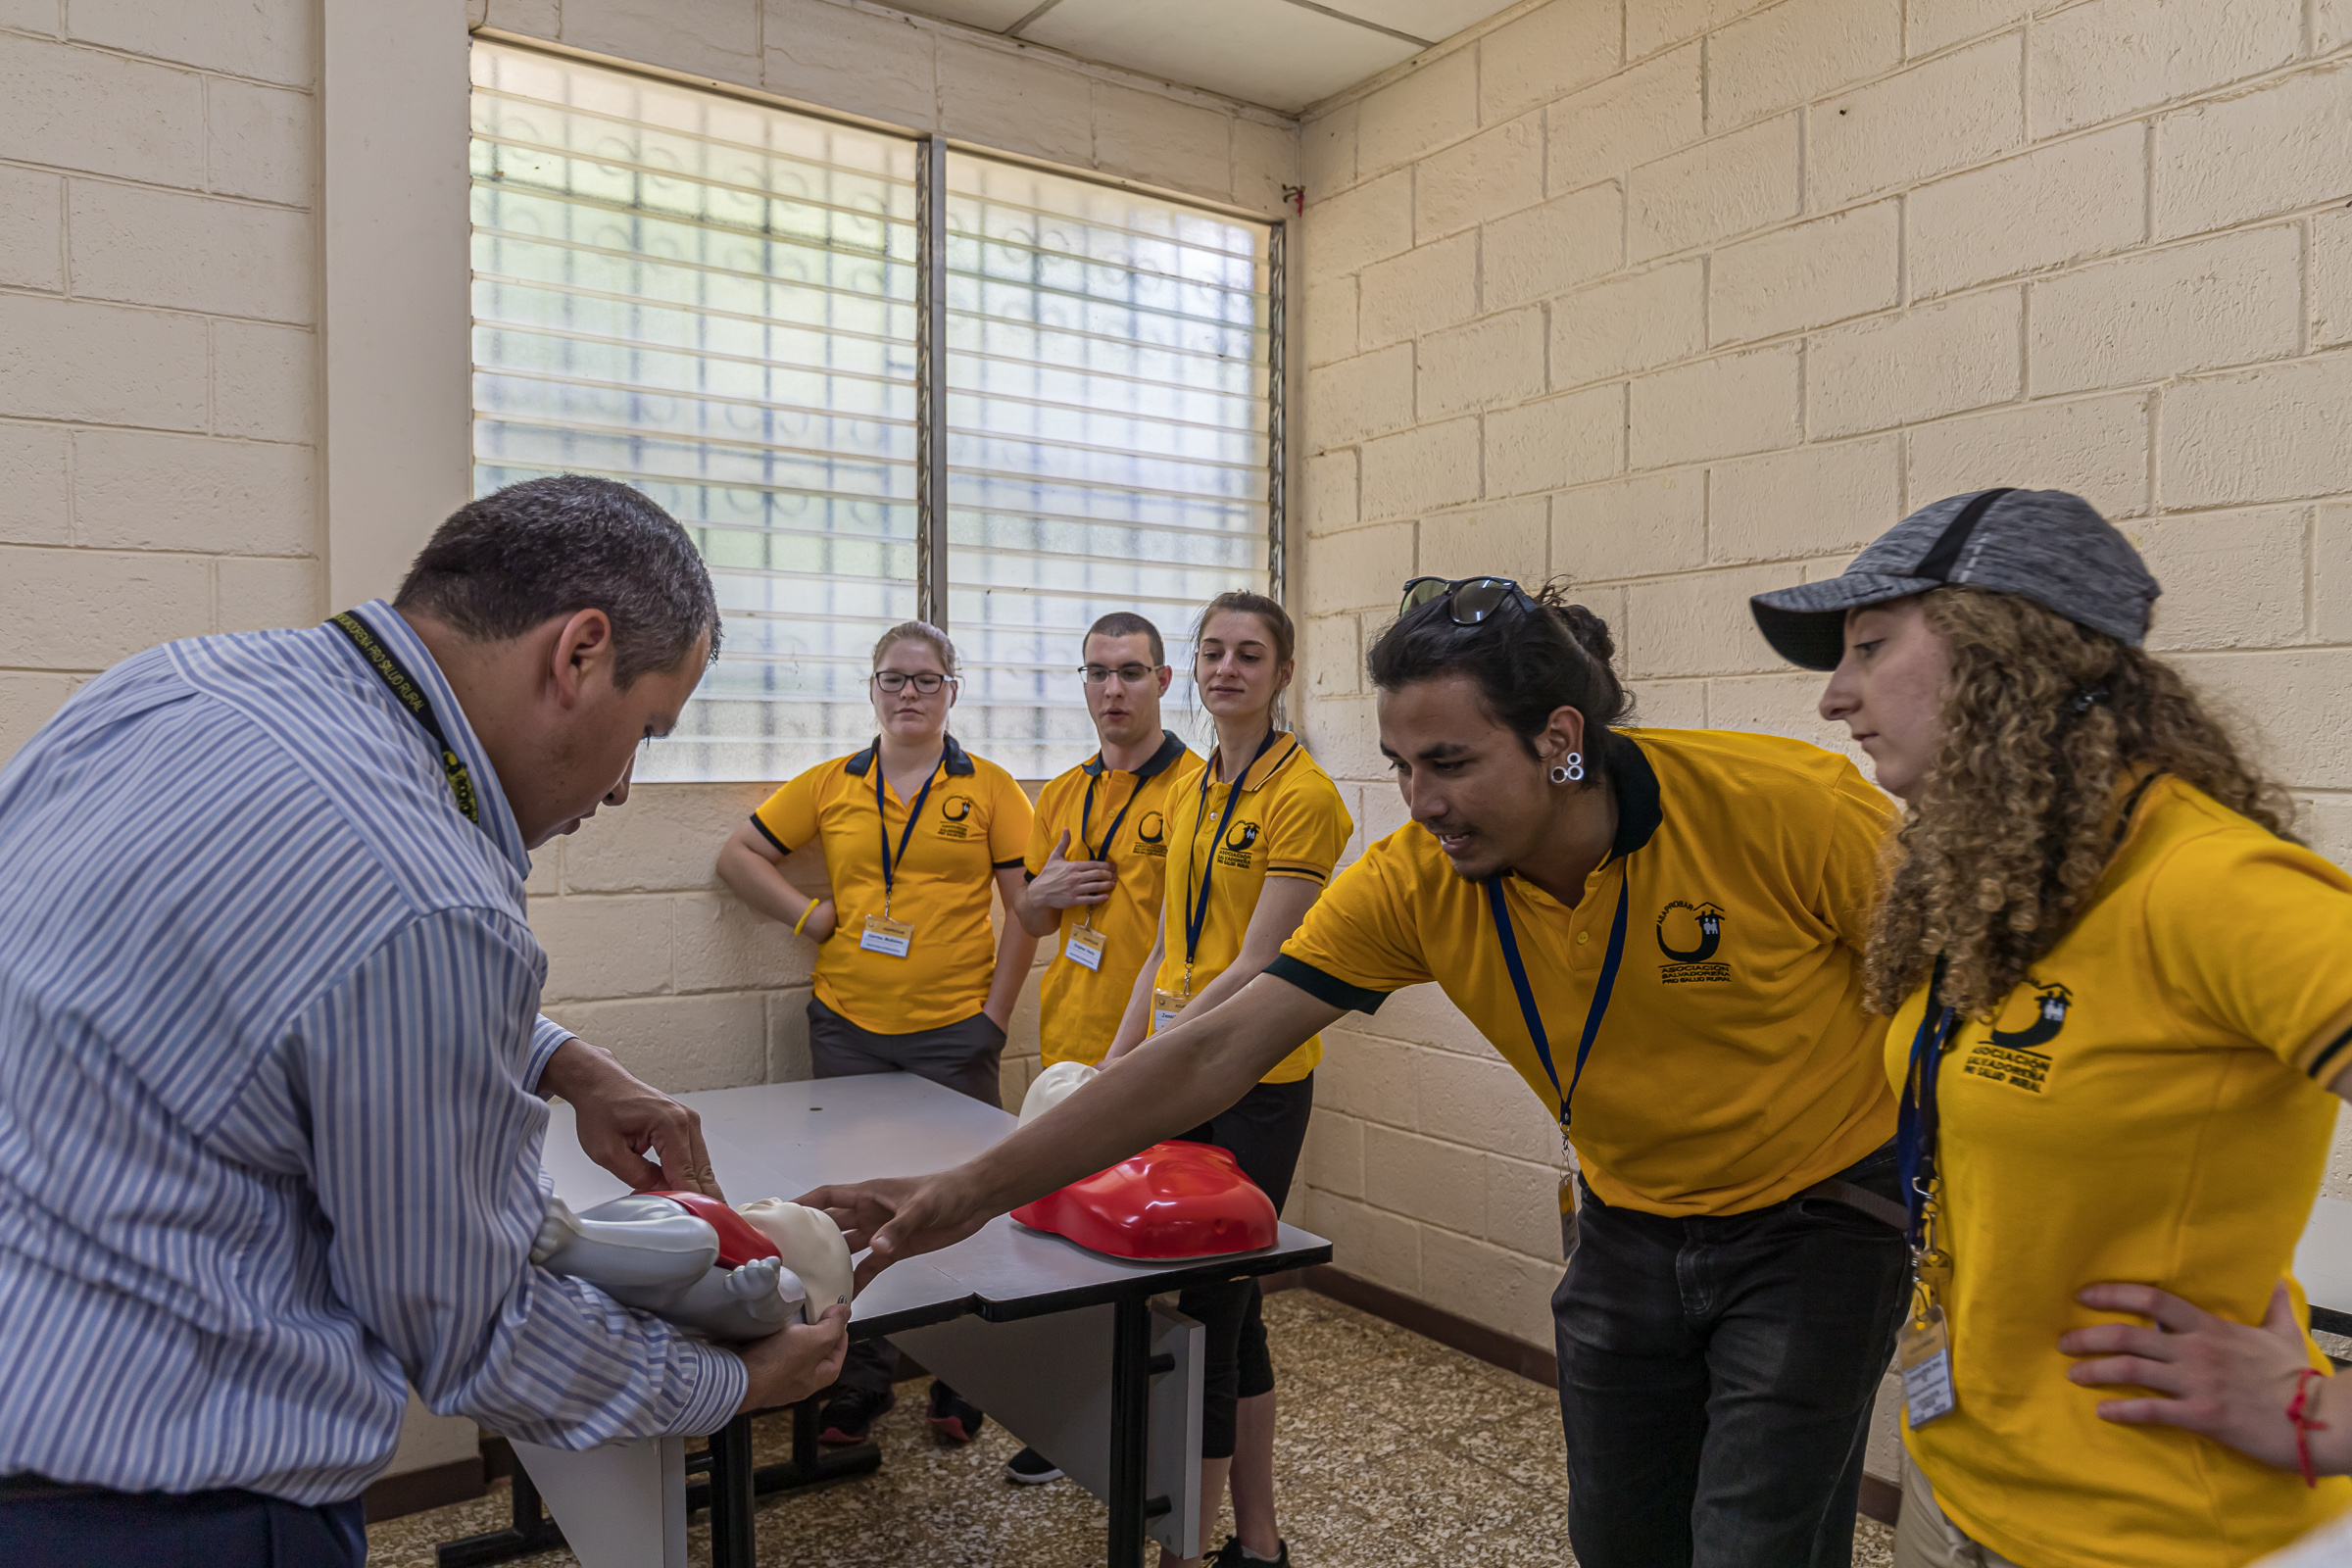 Health sciences students learning in a hands on training exercise in Nicaragua